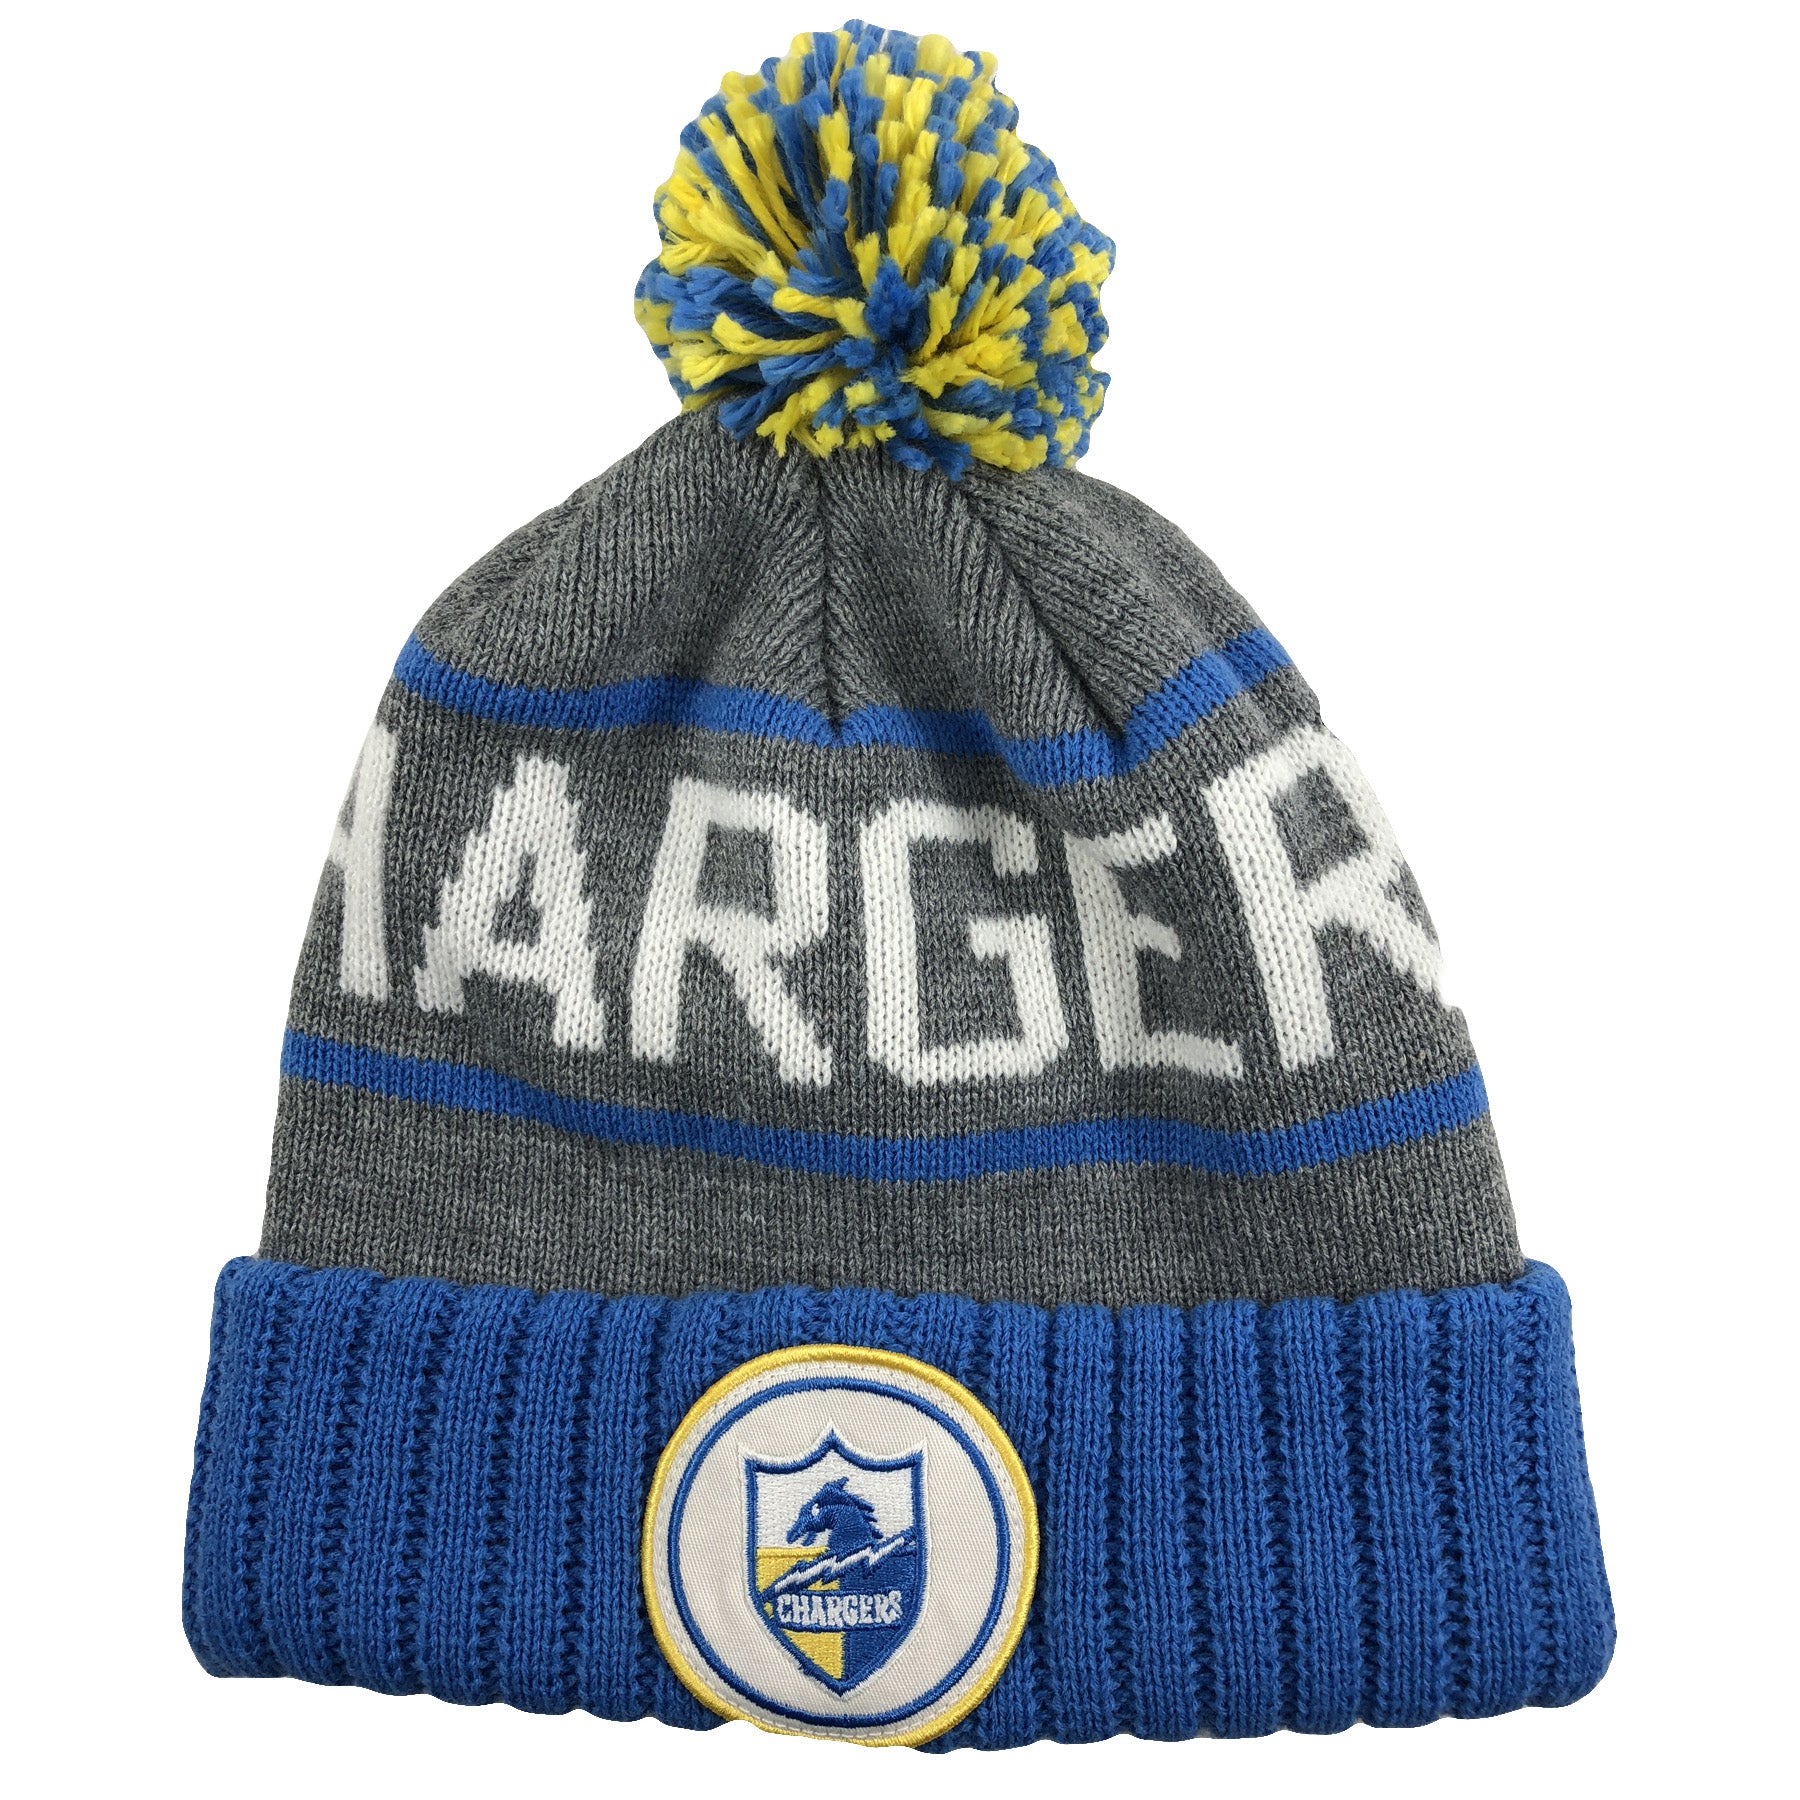 mitchell and ness chargers